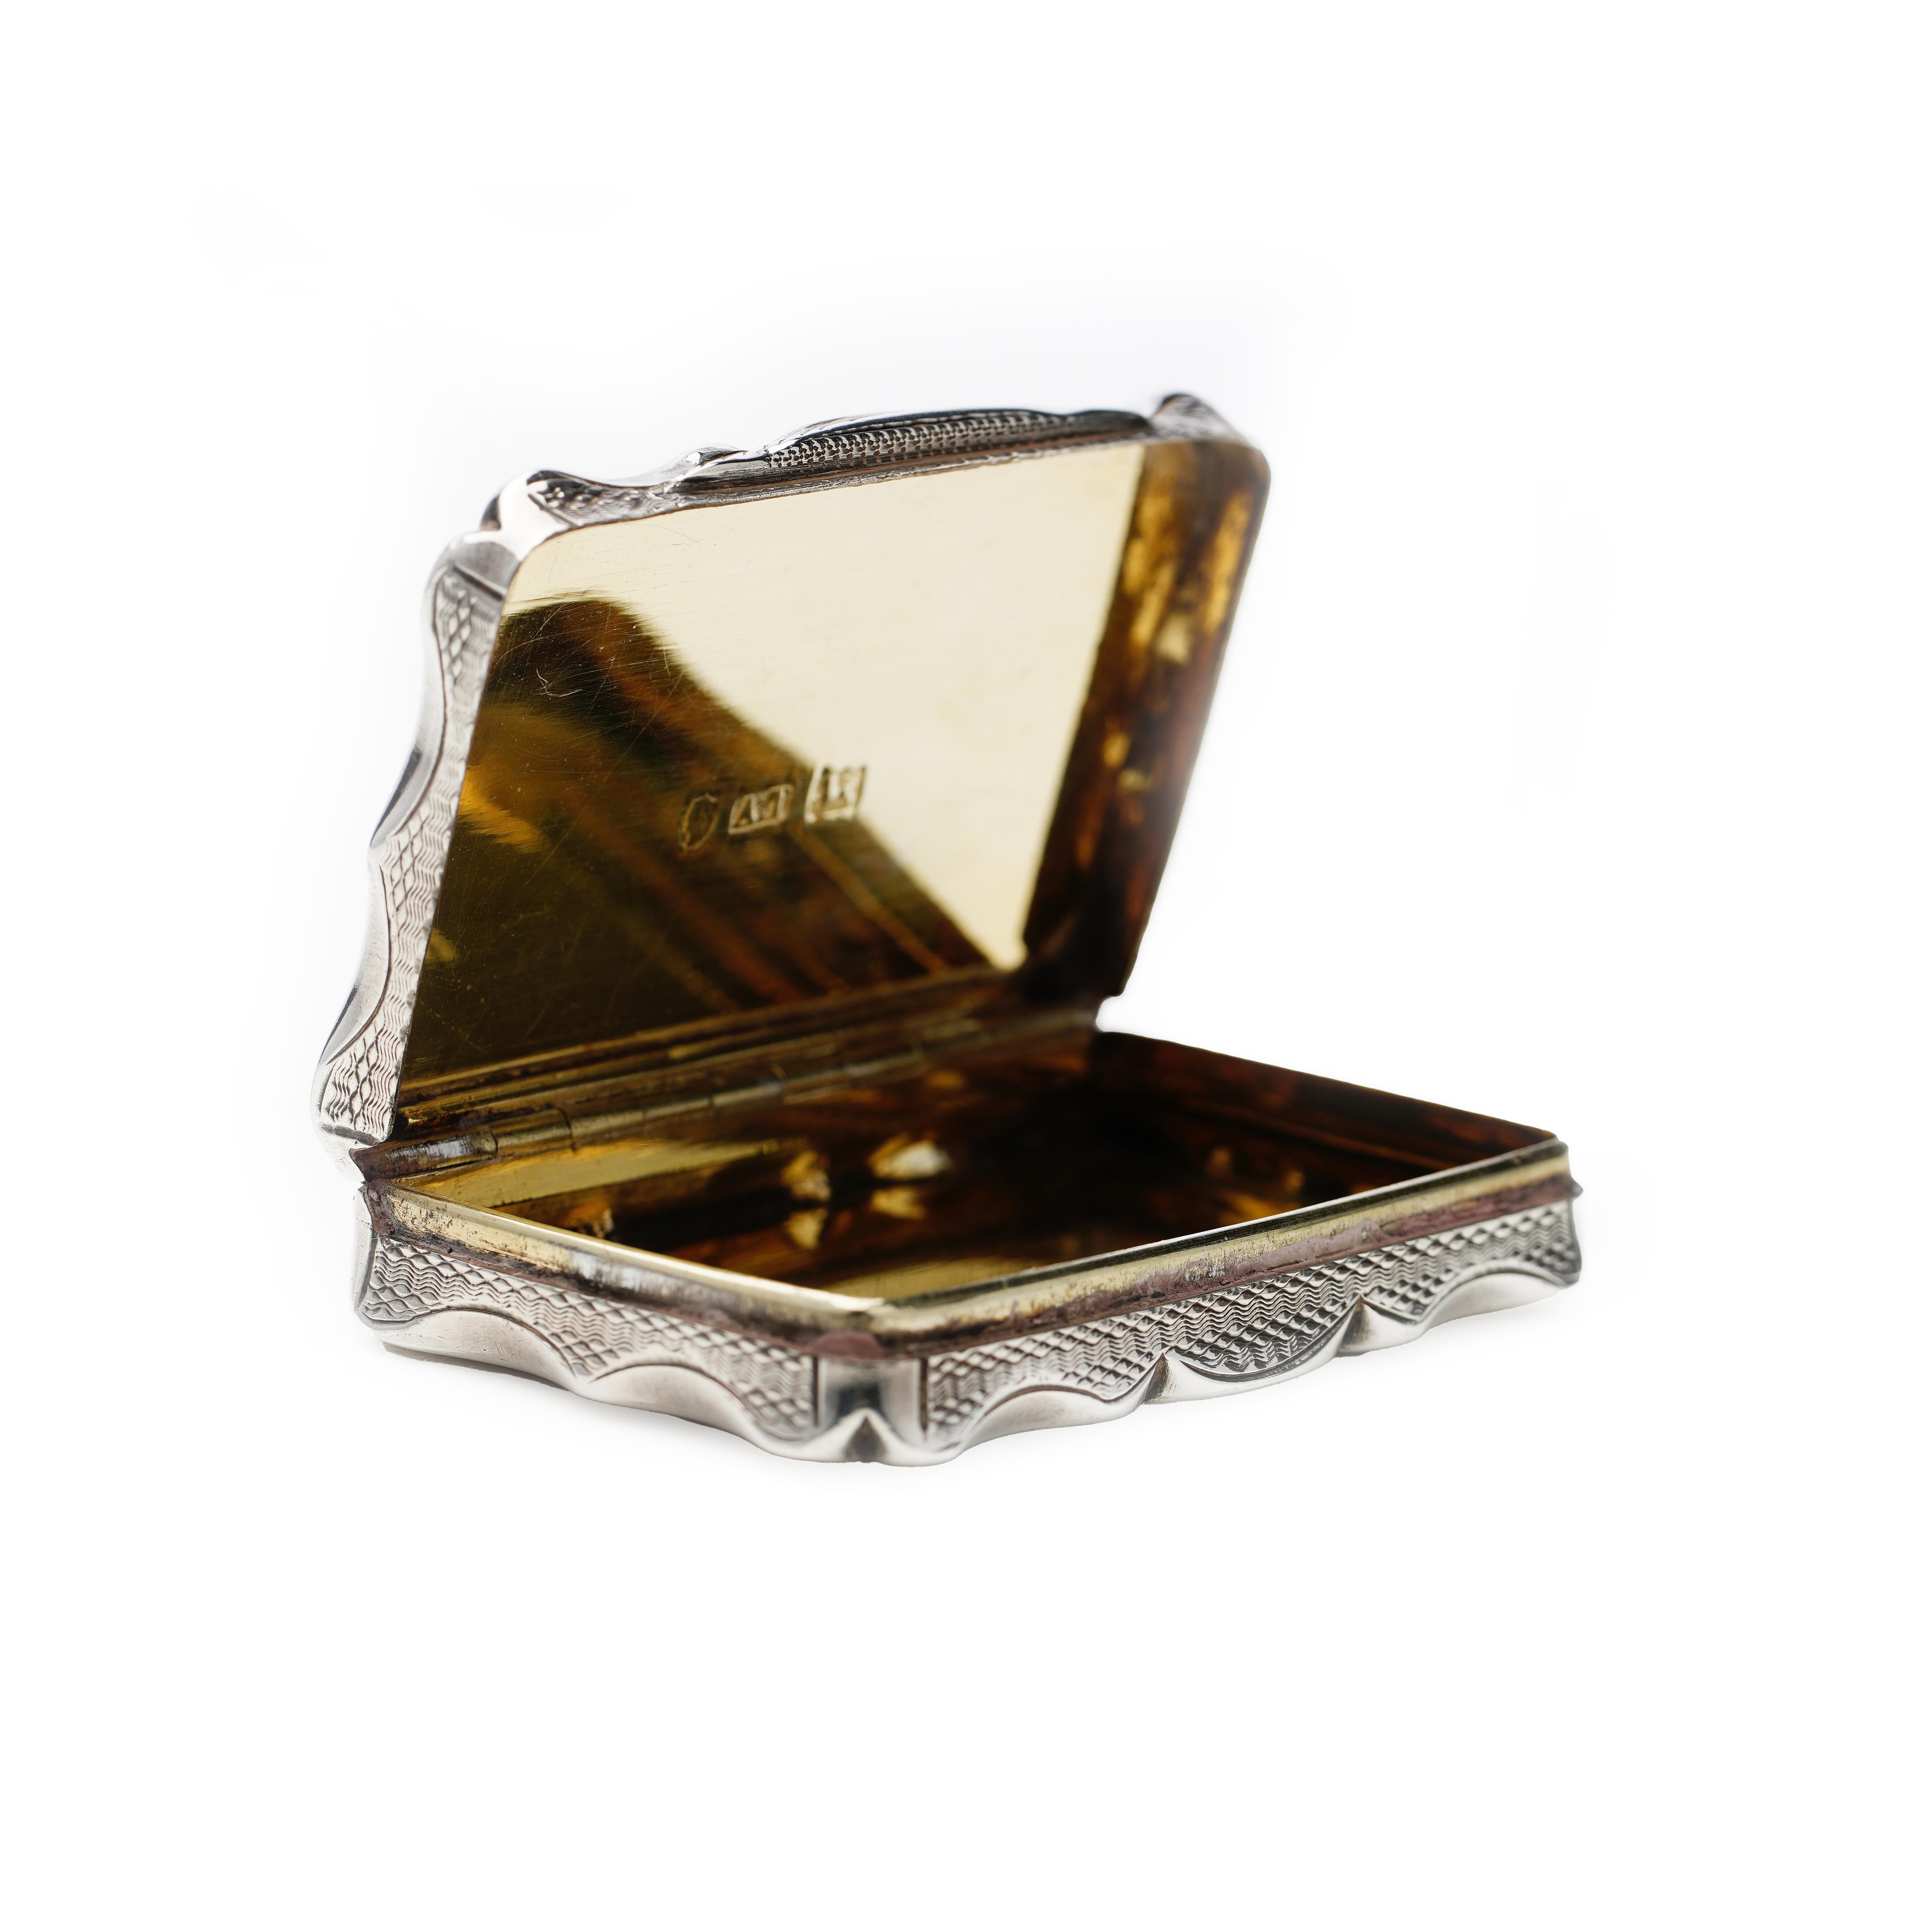 Antique Victorian sterling silver small box with gilded interior. 
Made in Birmingham, 1860
Maker : Alfred Taylor
Fully hallmarked.

Approx Dimensions - 
Size : 6 x 4 x 1 cm 
Weight : 44 grams

Condition: Age related wear and tear, good